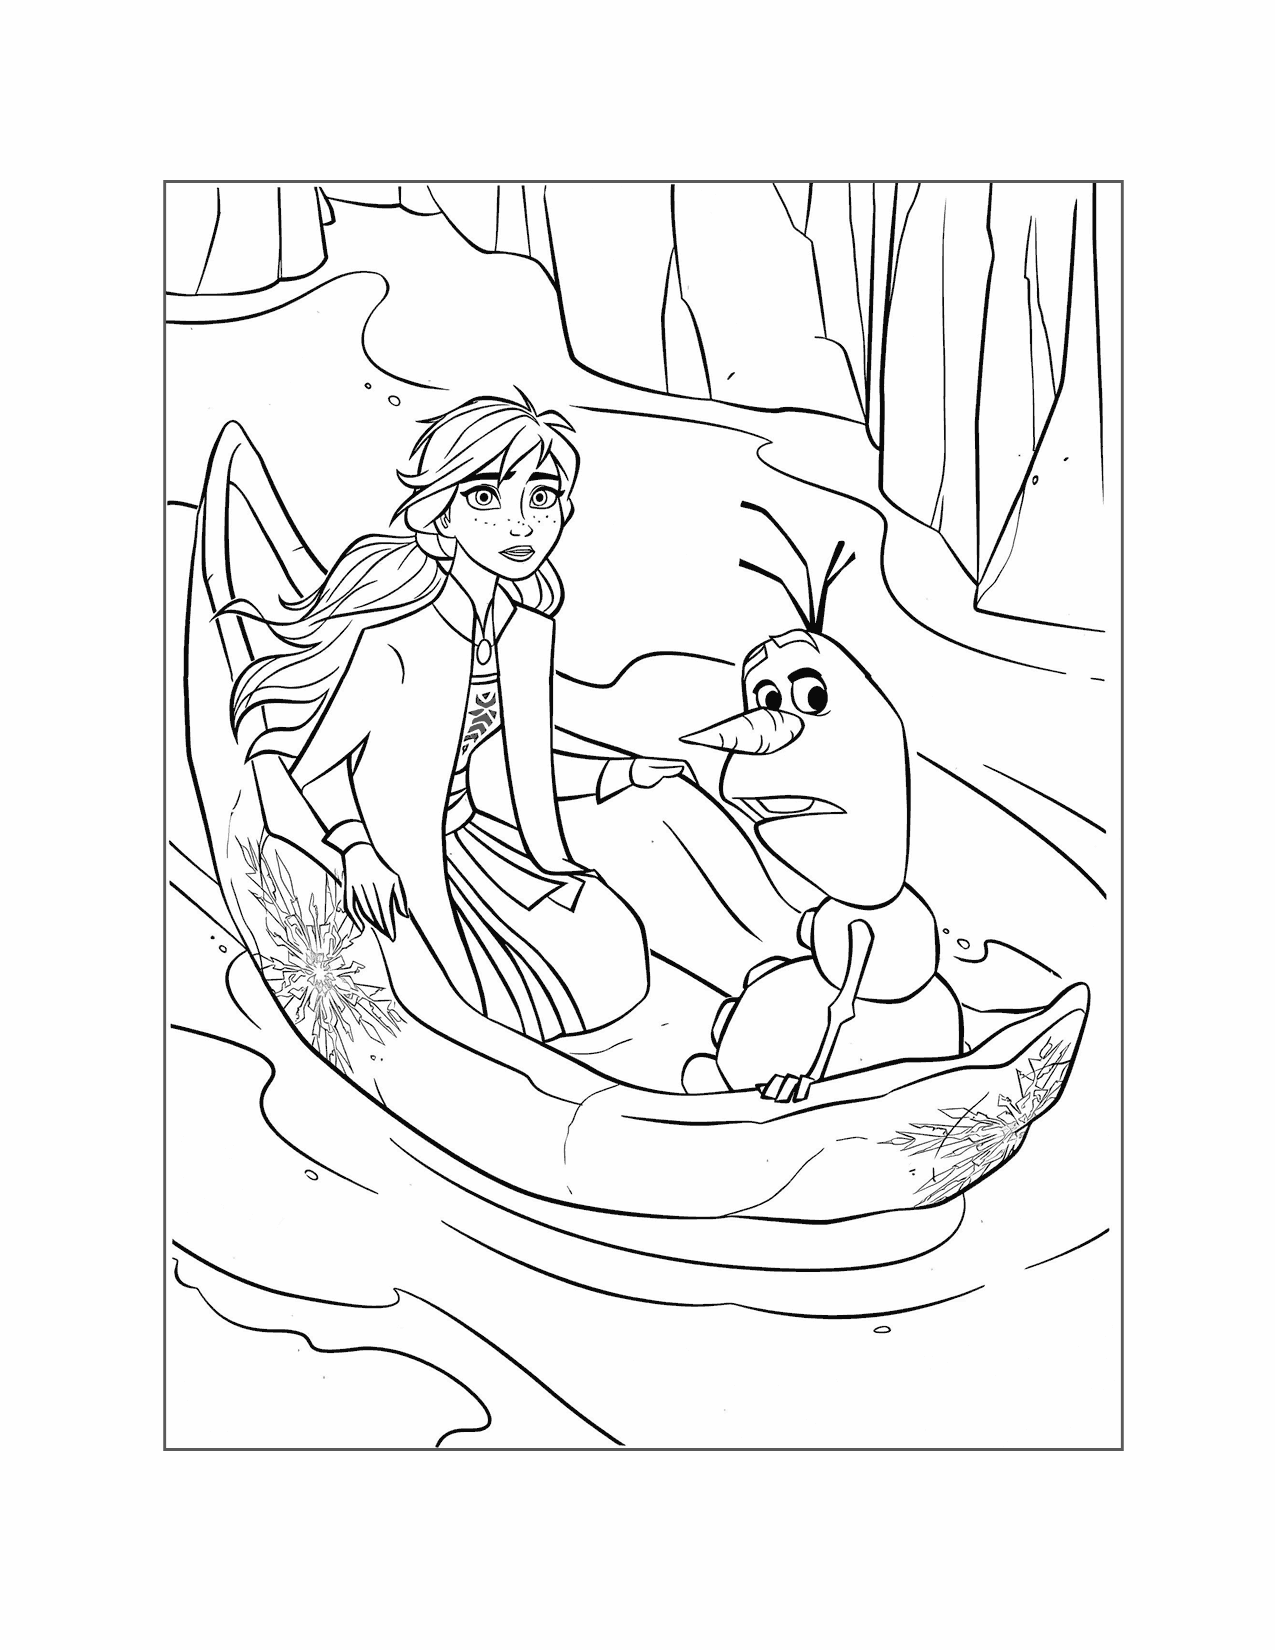 Anna And Olaf In A Boat Coloring Page